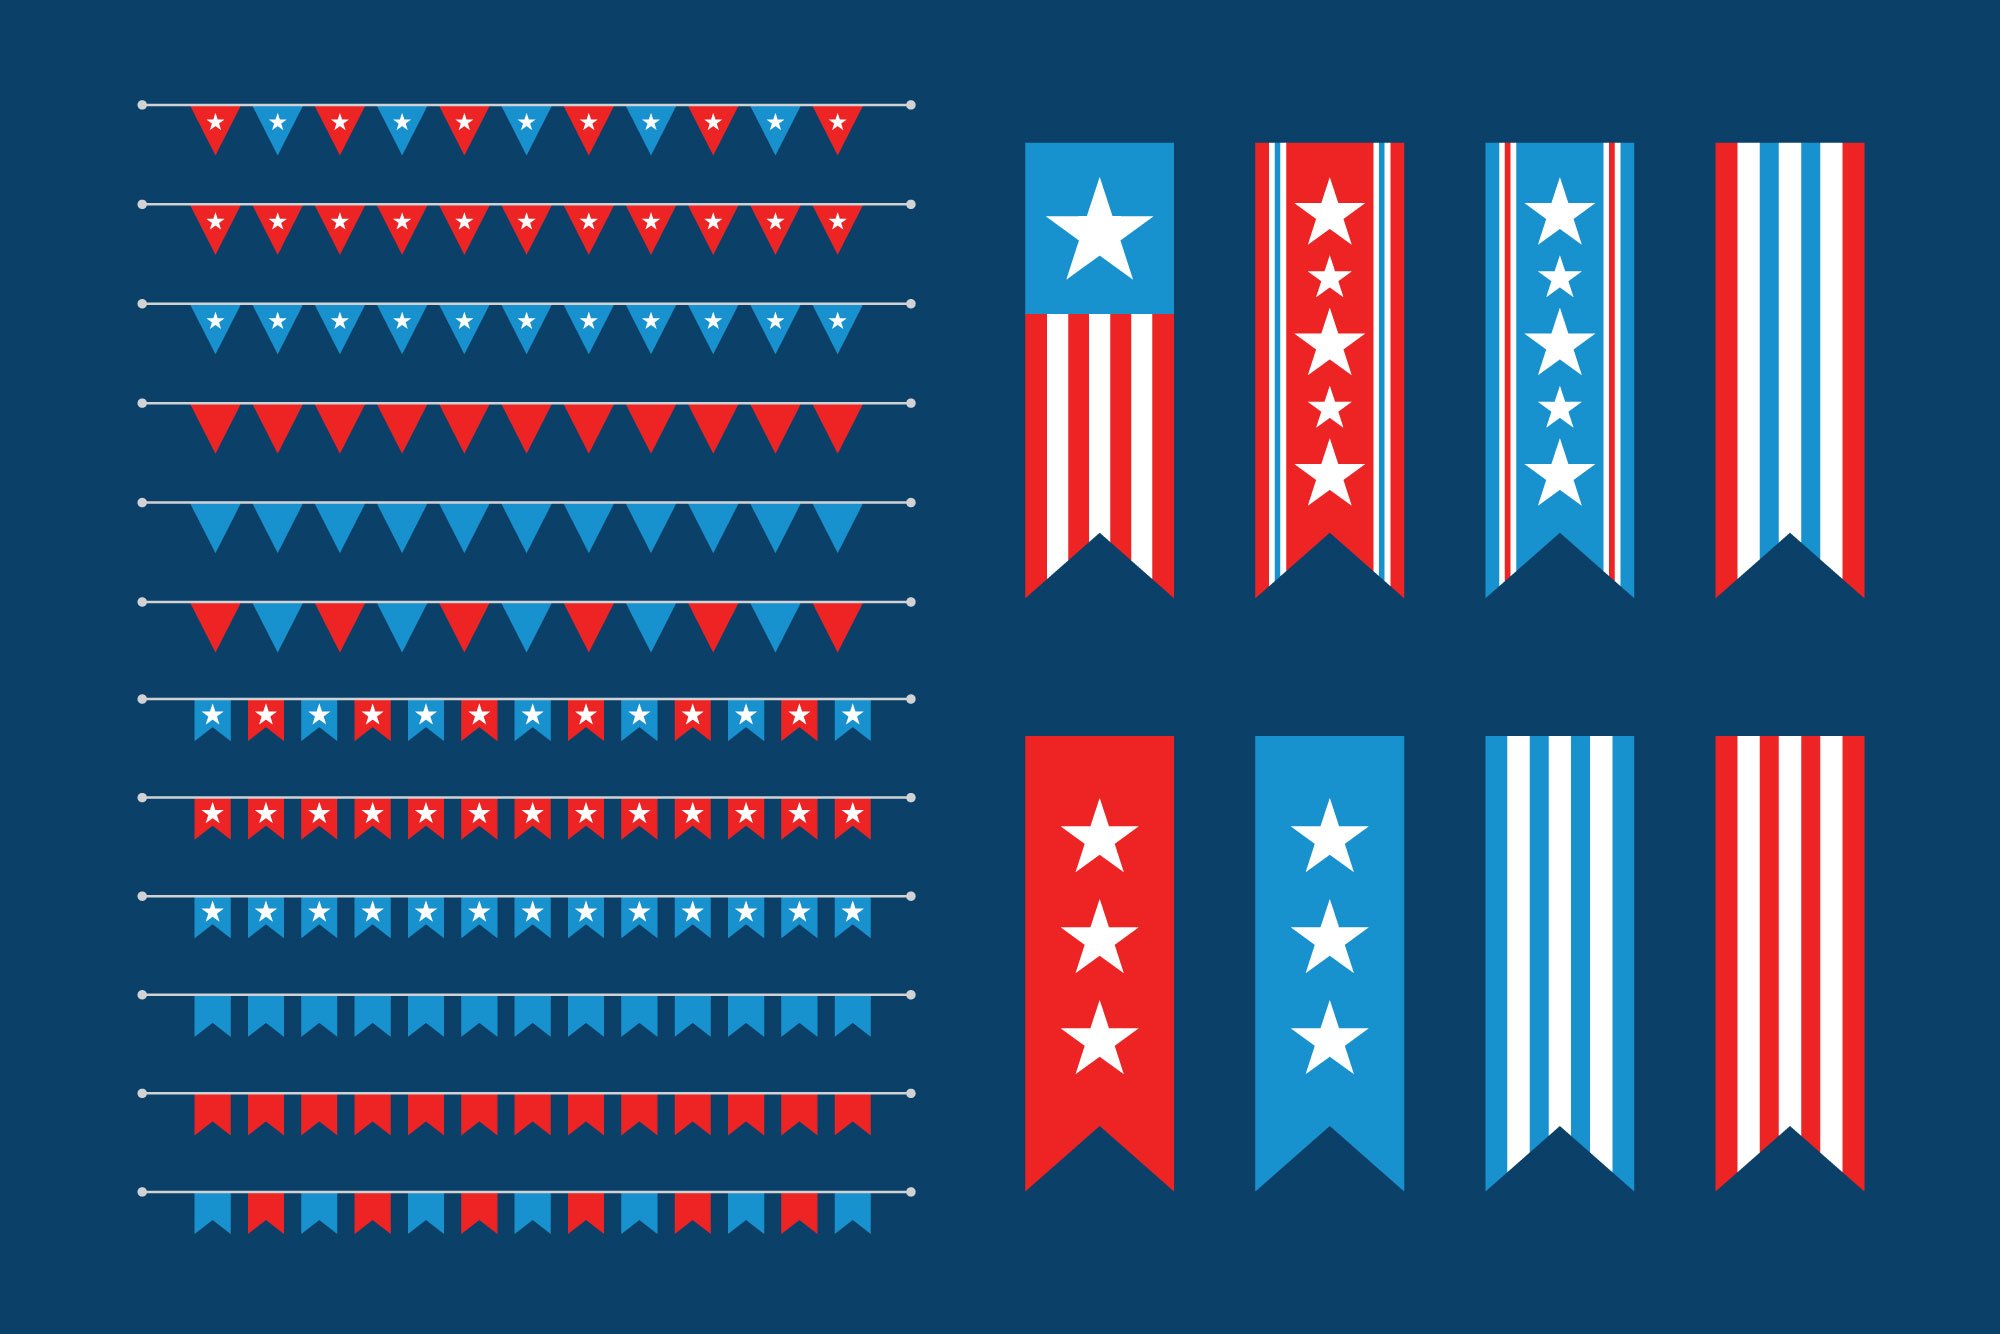 Dark blue background with the different Independence Day attributes.